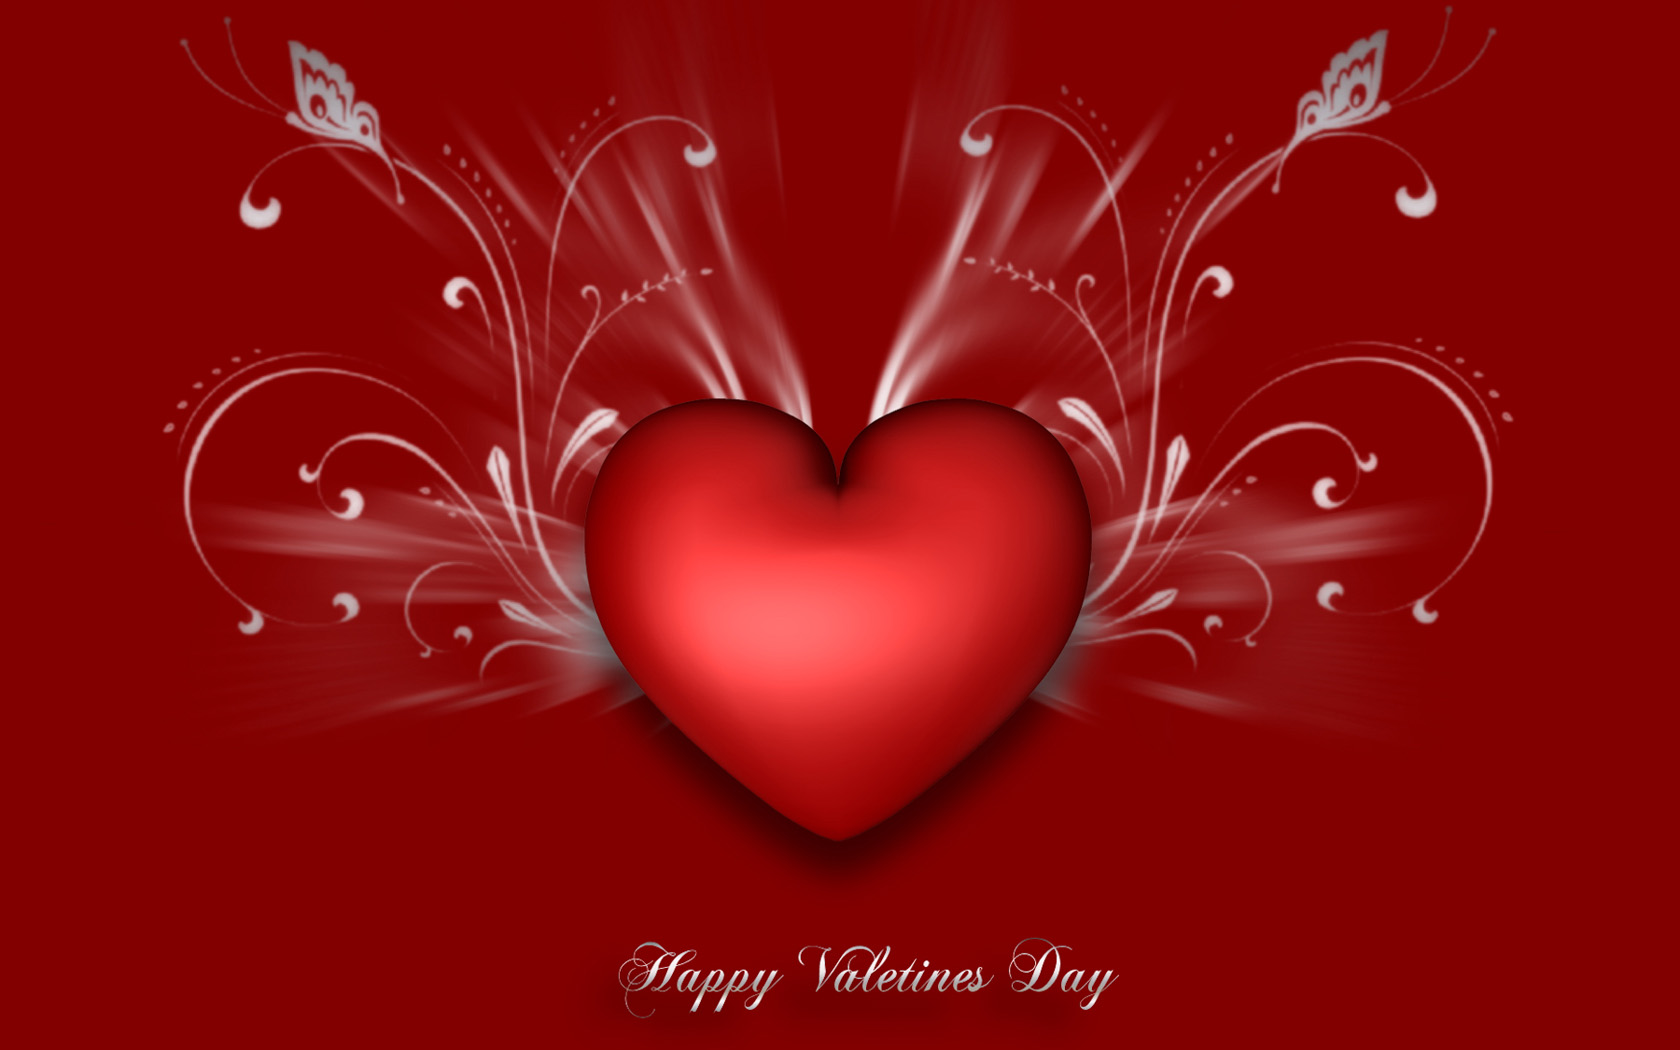 10 Cool Happy Valentines Day Wallpapers for Your Desktop